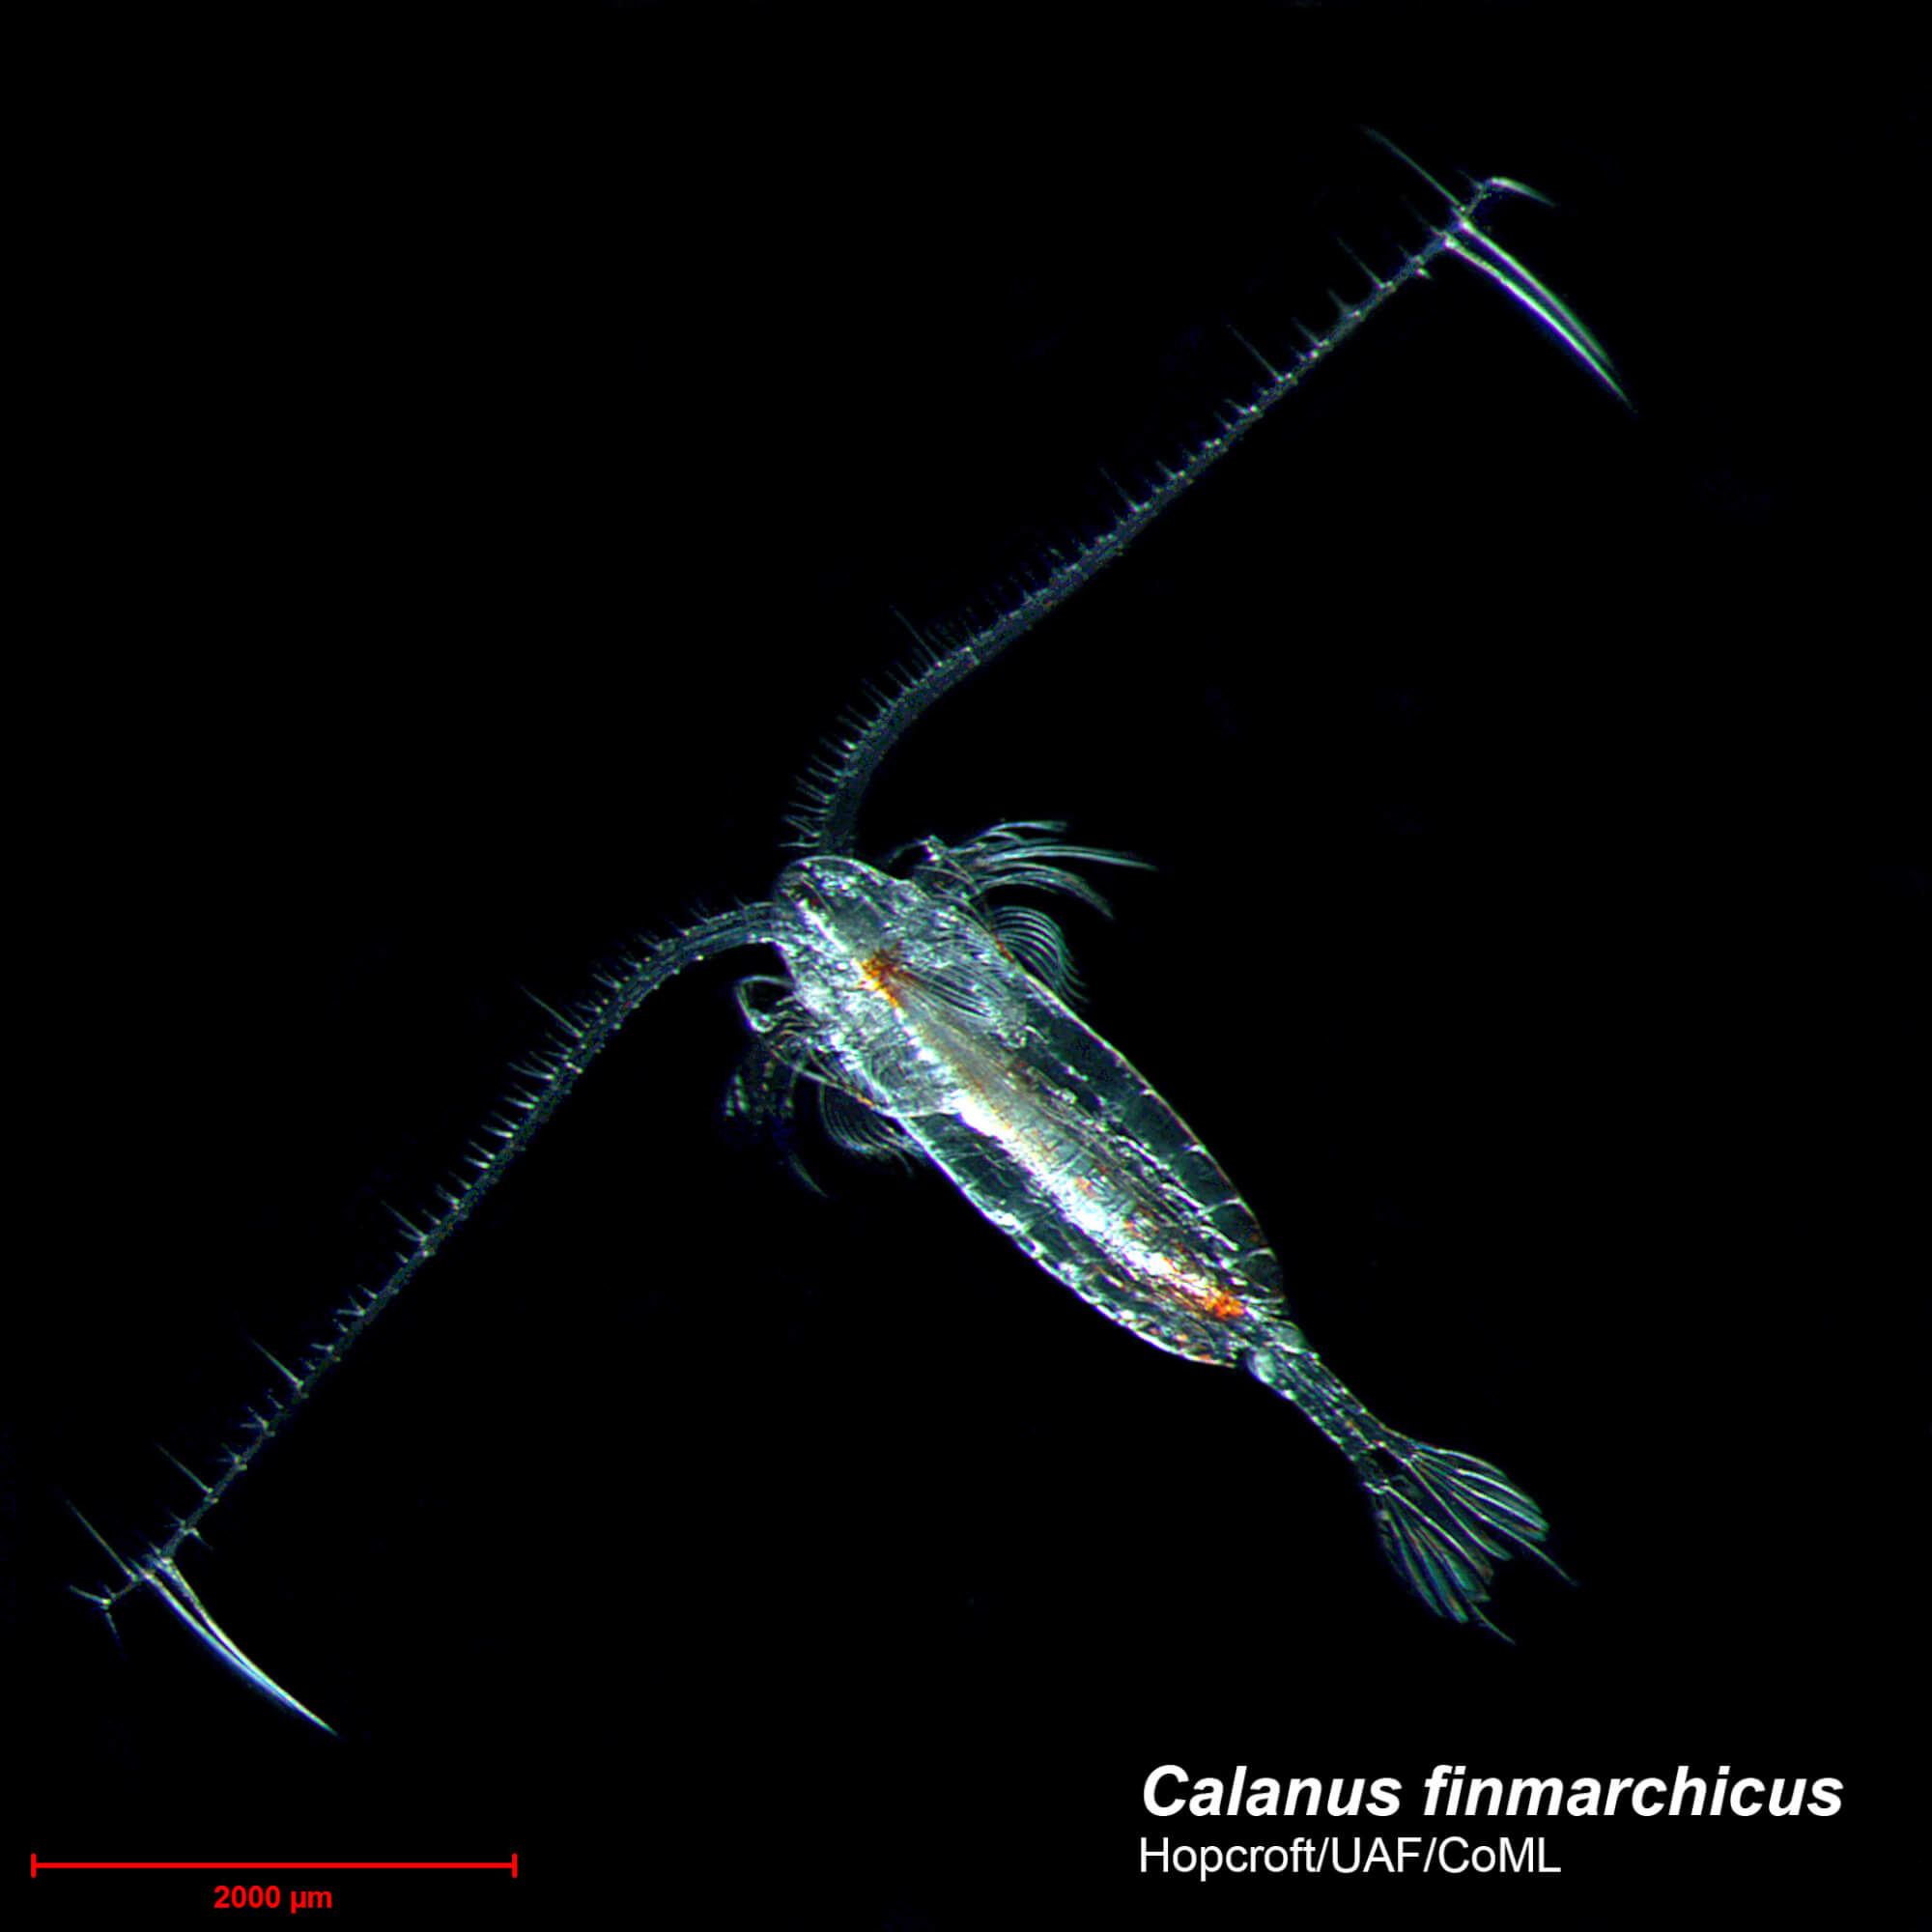 Calanus finmarchicus is a copepod eaten by North Atlantic right whales